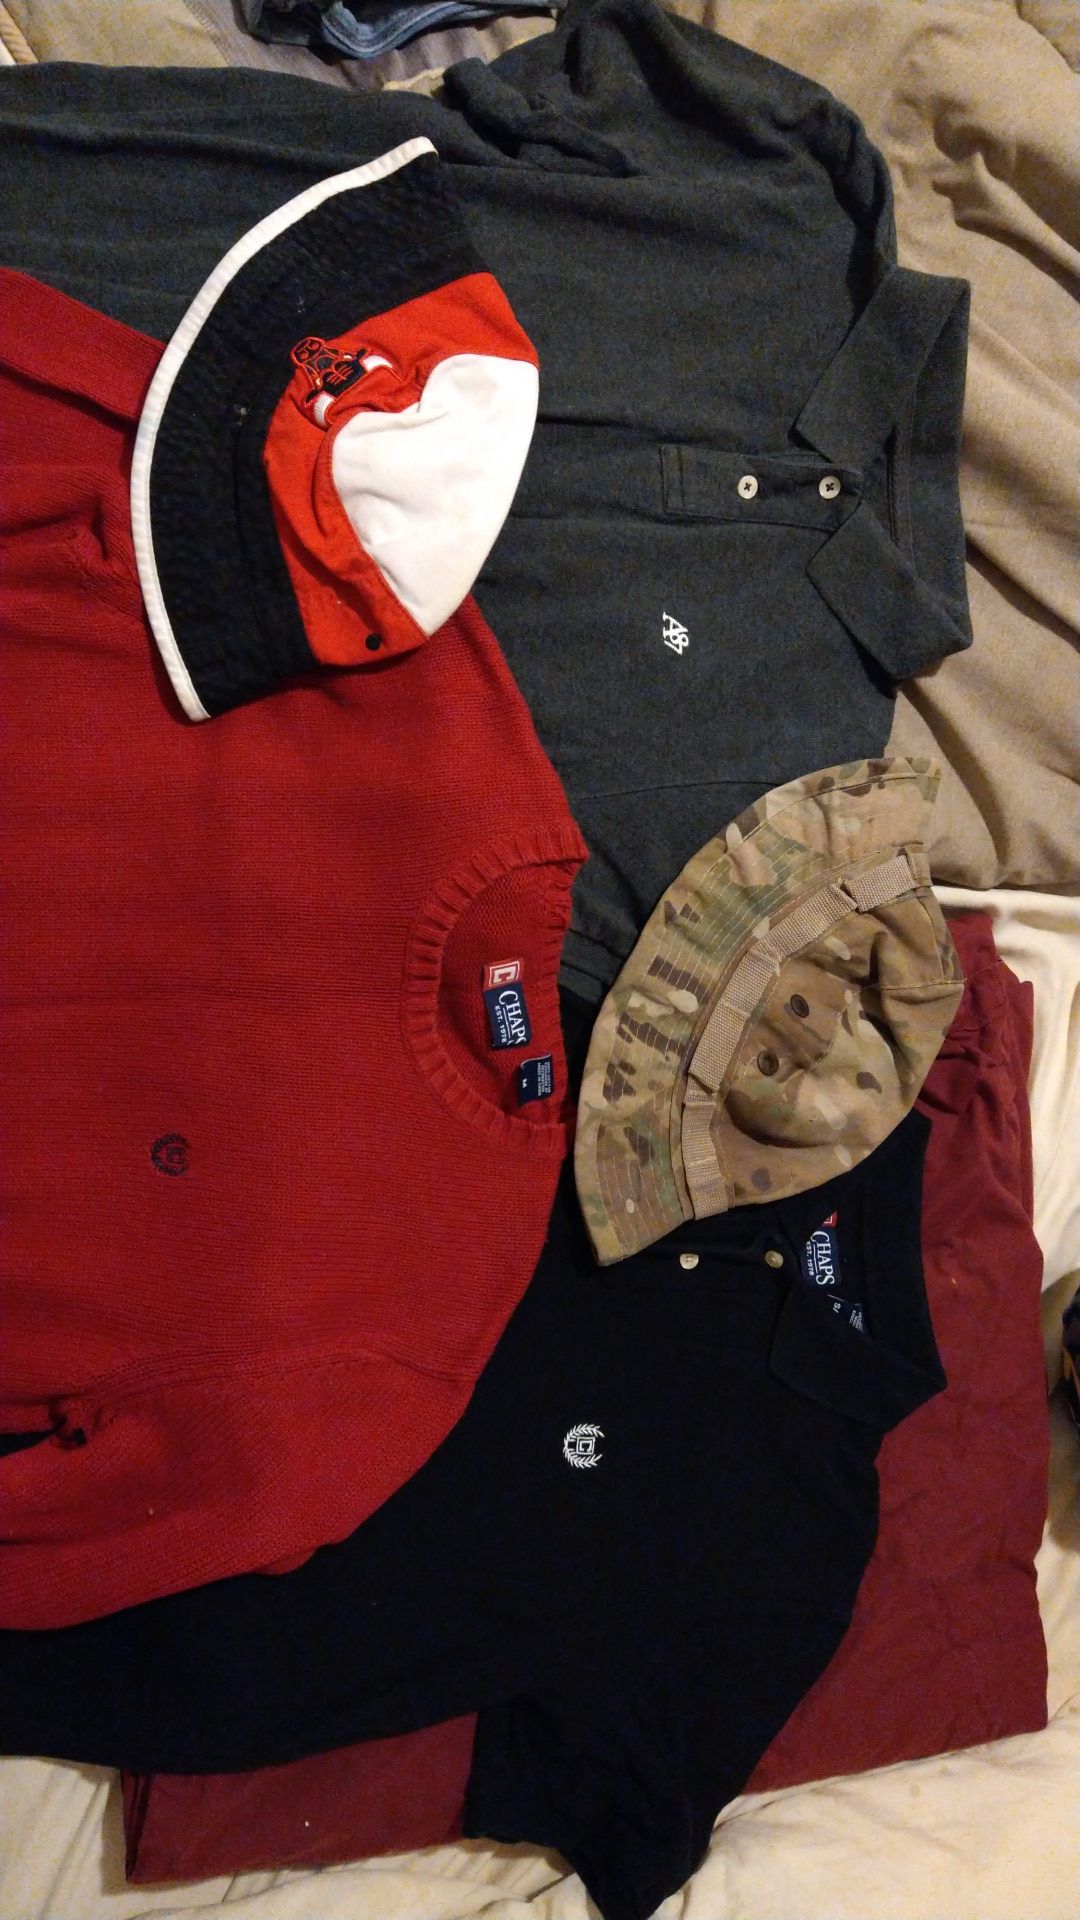 Large and medium size clothes with bulls and camo hats